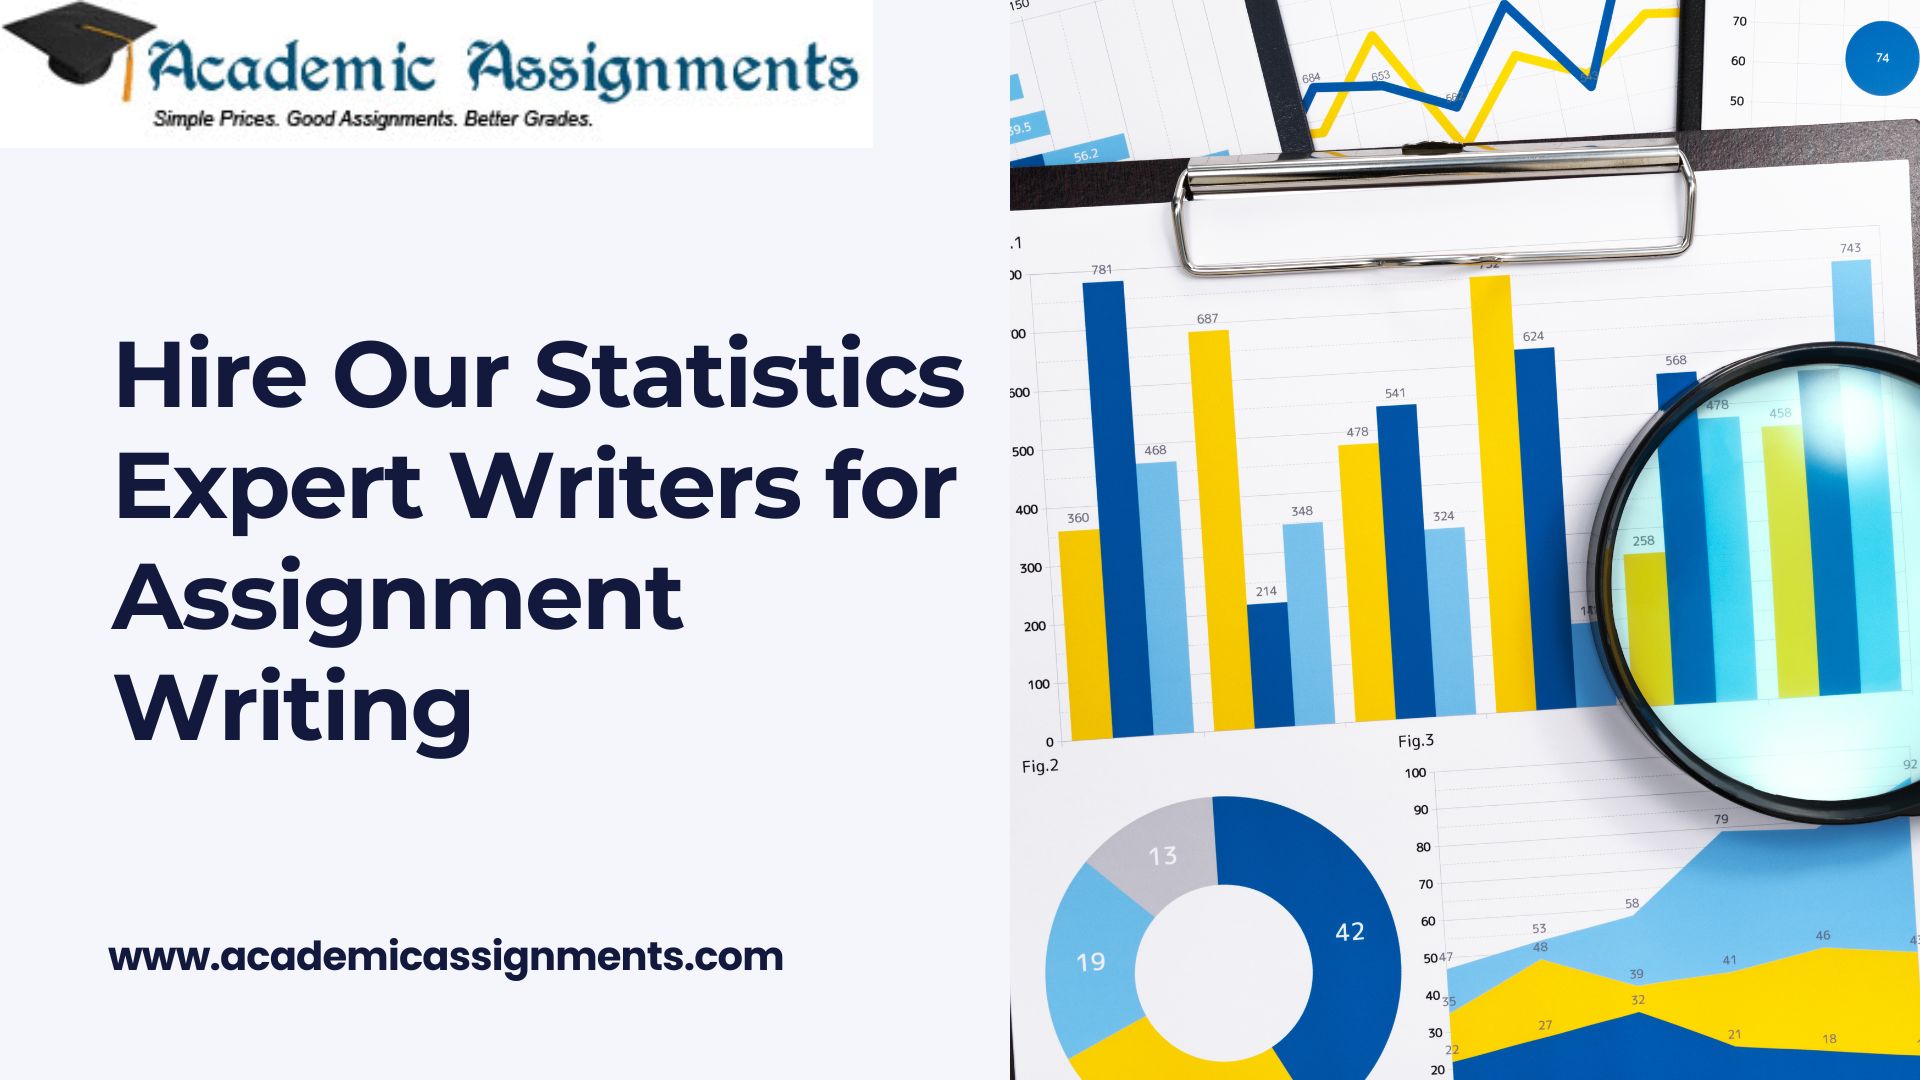 Hire Our Statistics Expert Writers for Assignment Writing